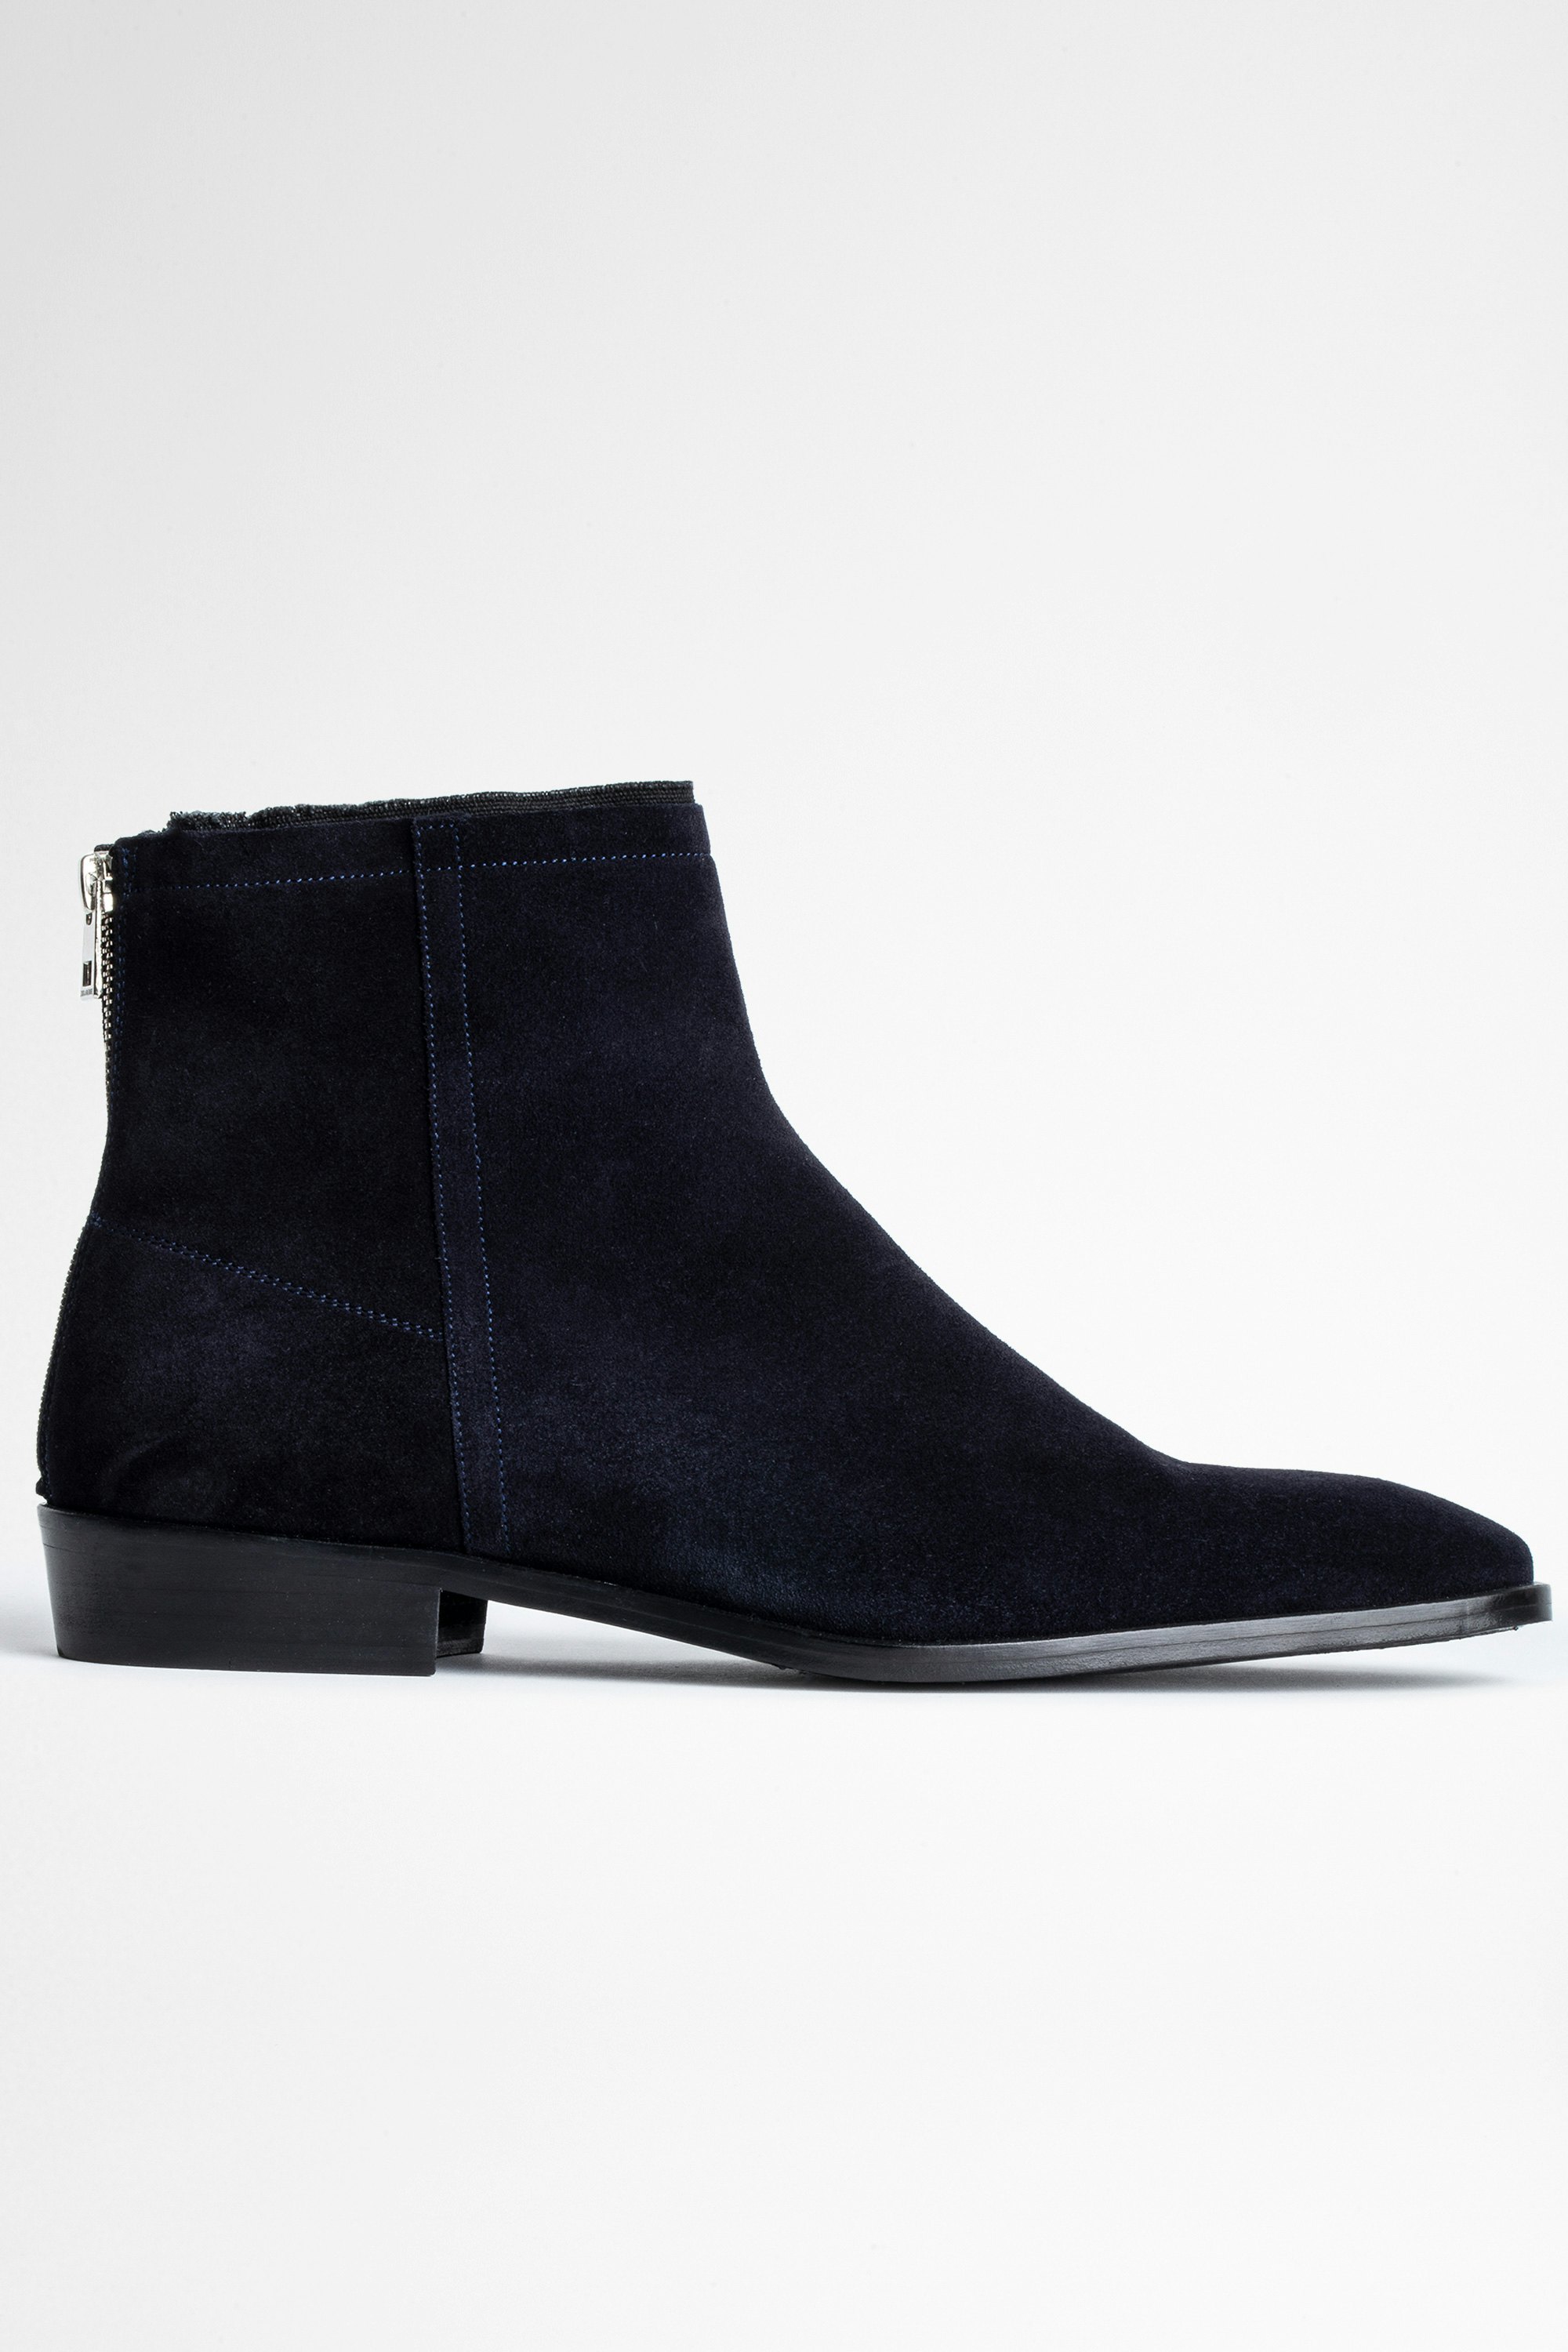 Suede Ankle Boots Leather Men's navy blue suede ankle boots